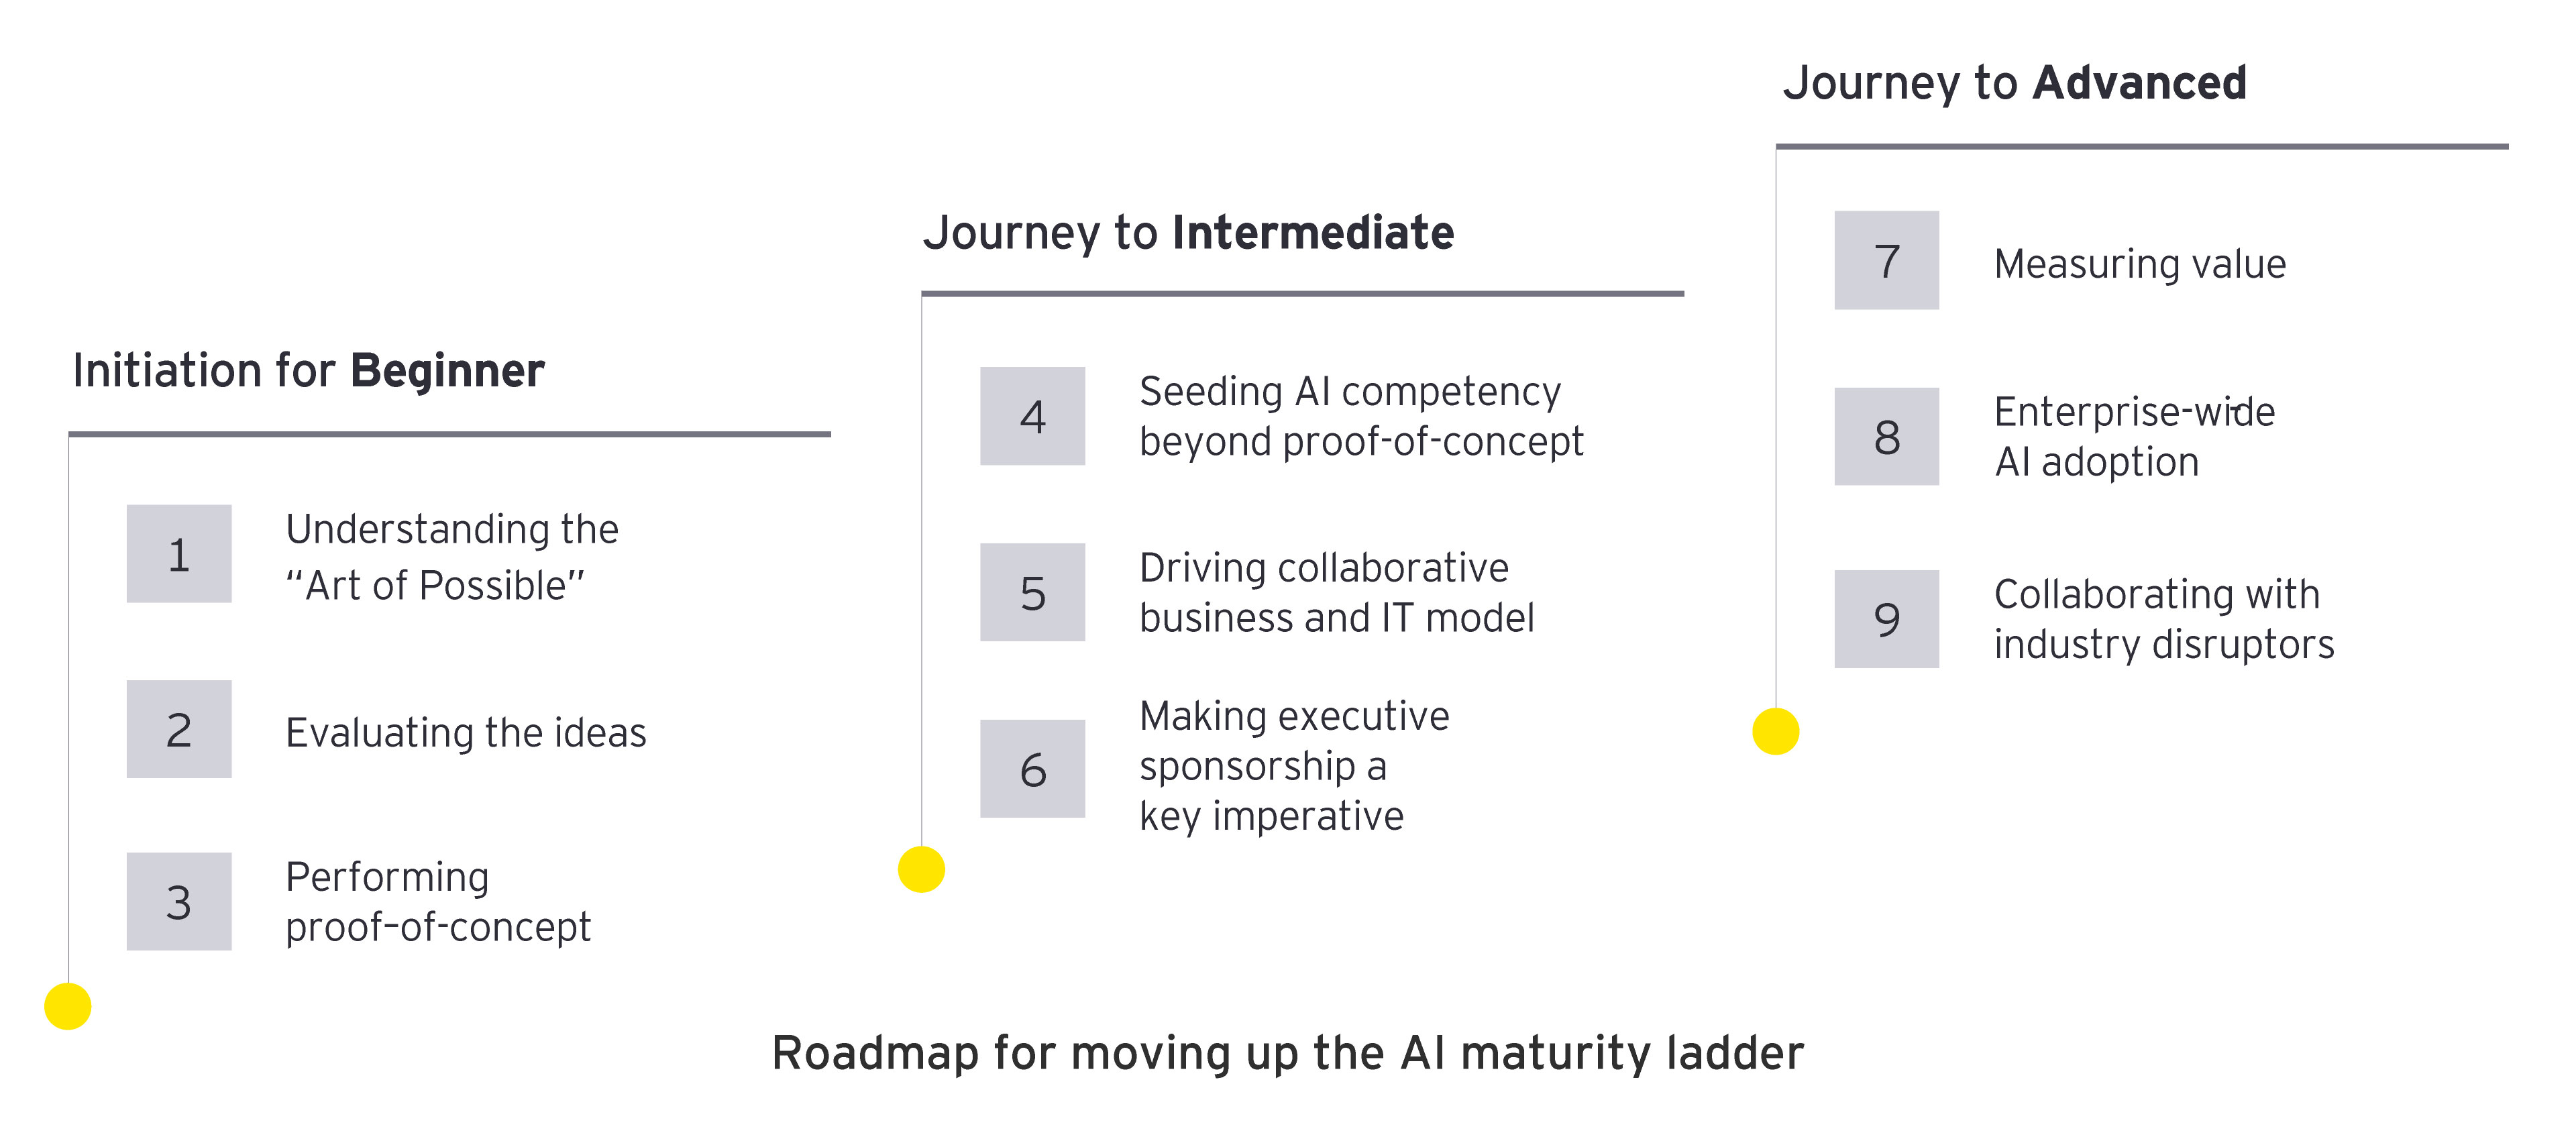 Roadmap for moving up the AI maturity ladder